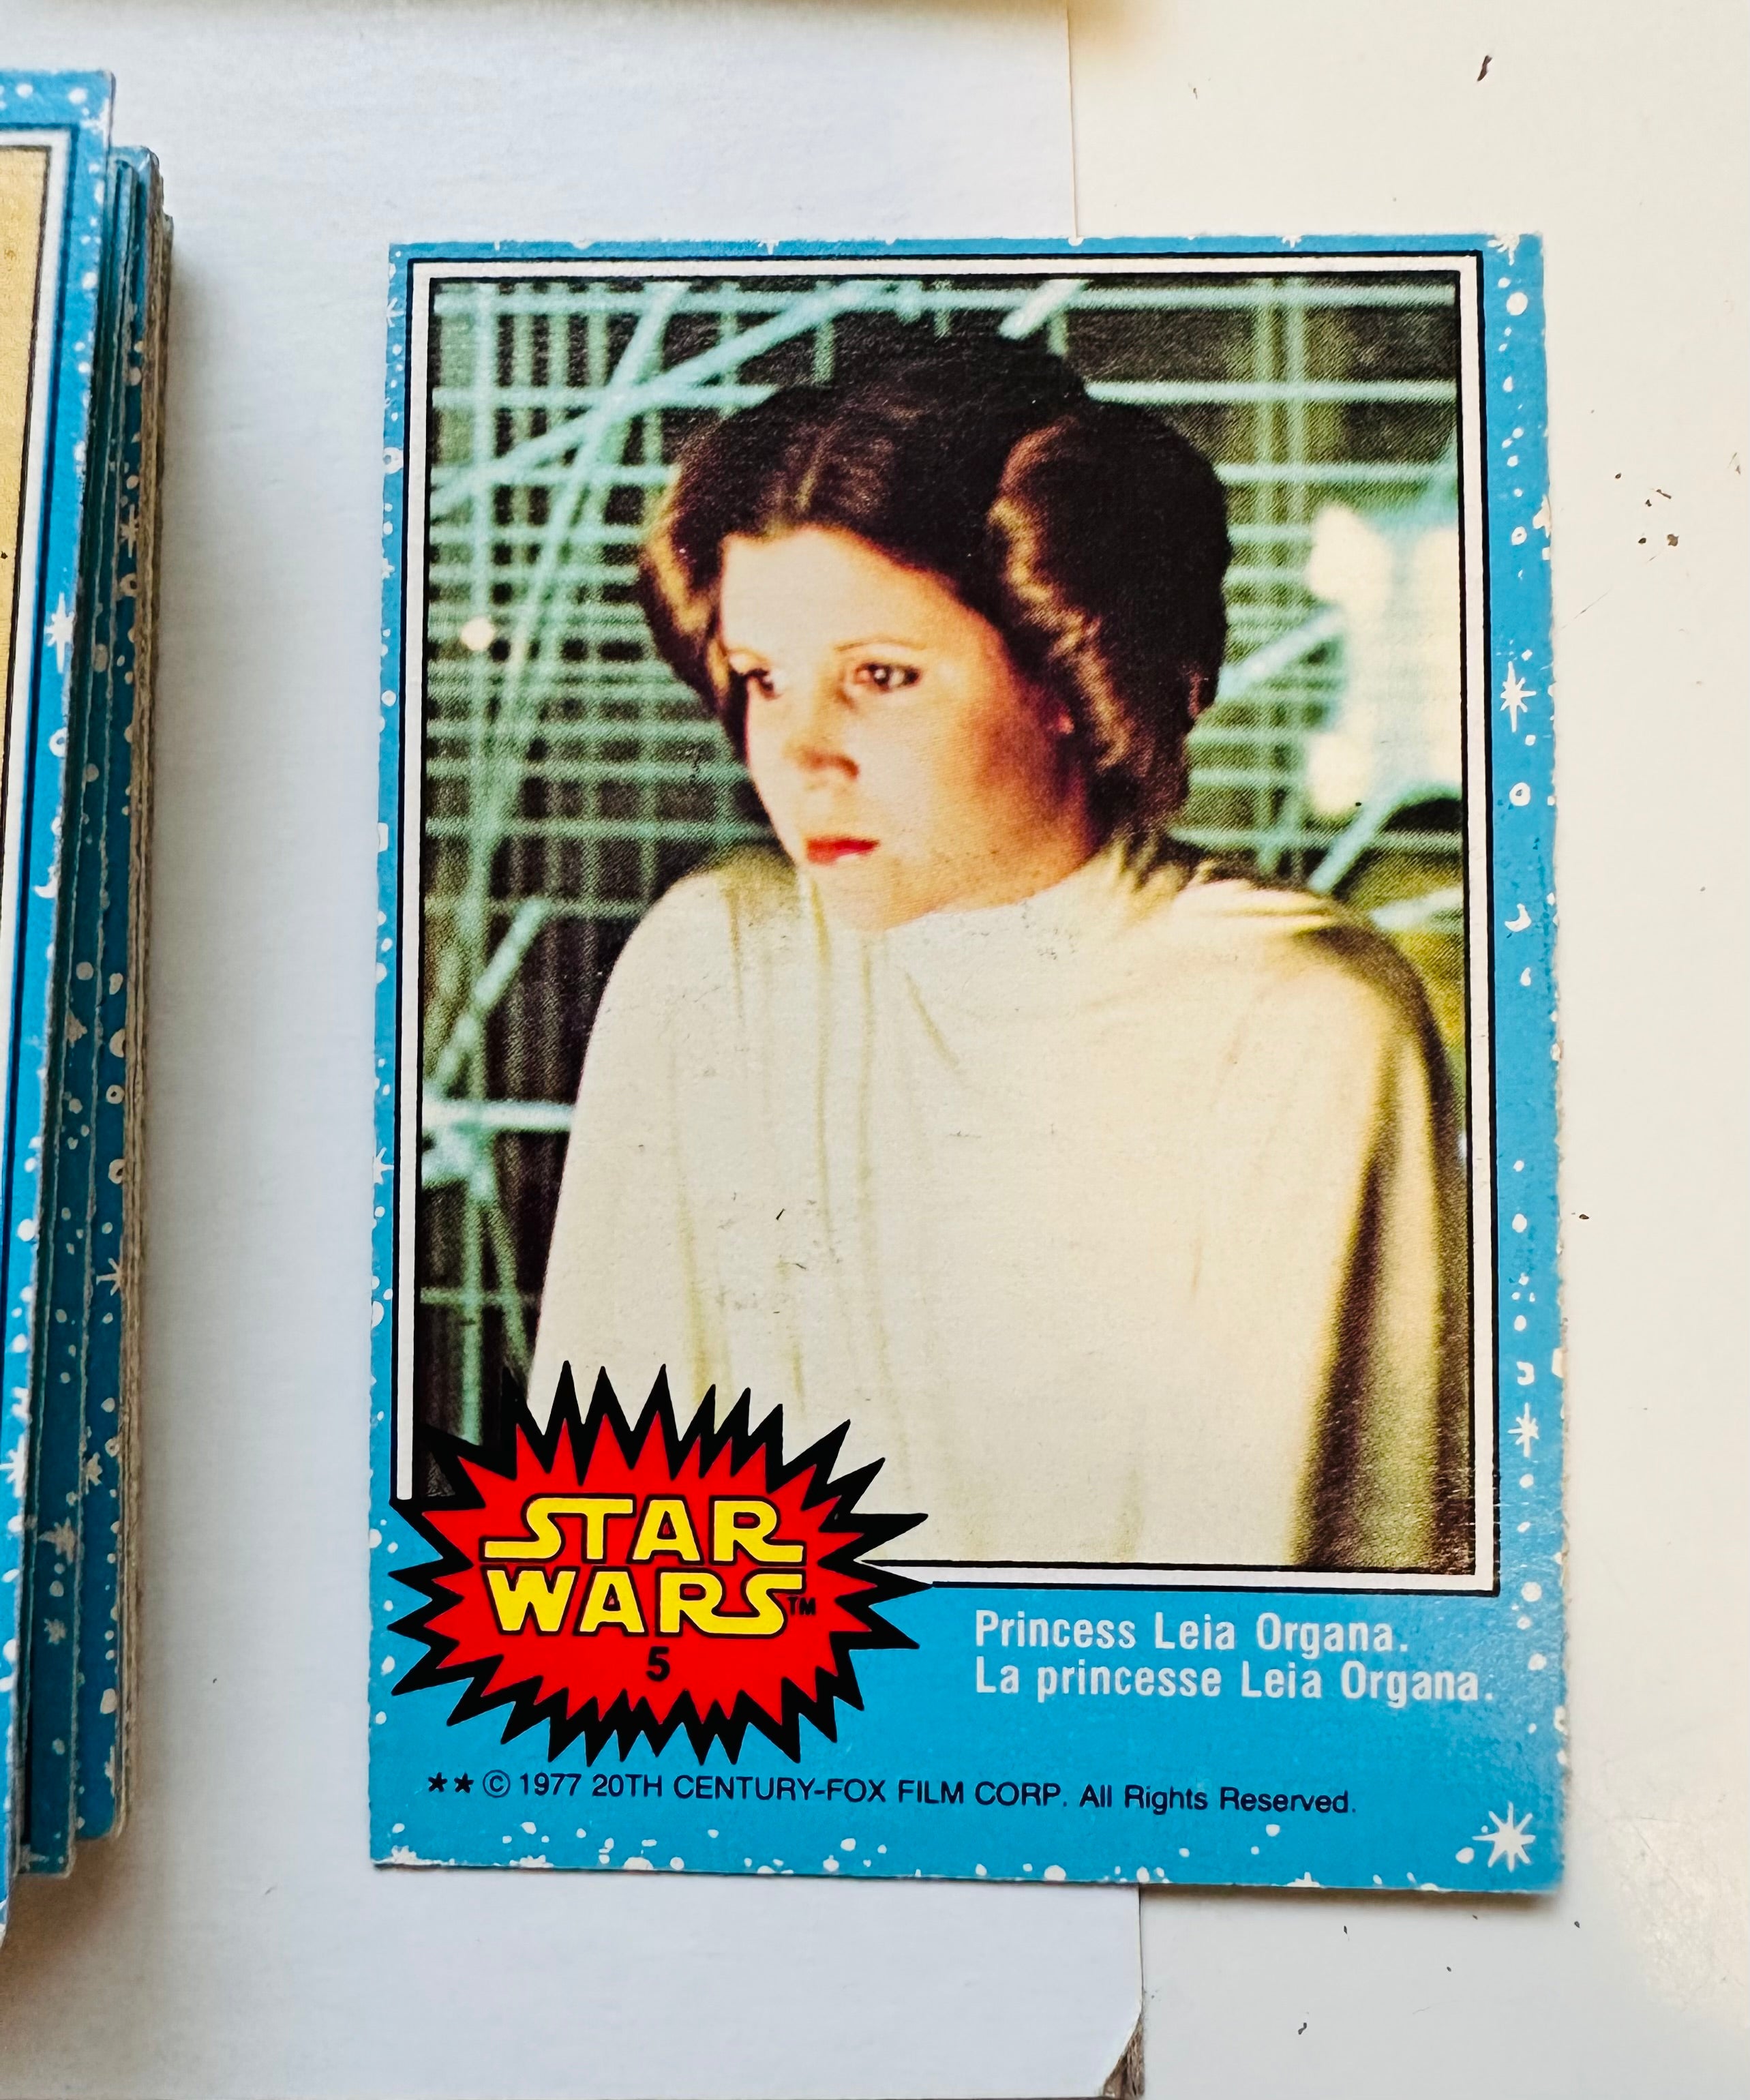 Star Wars series 1 Opc Canadian version cards and stickers set with Opc wrapper 1977